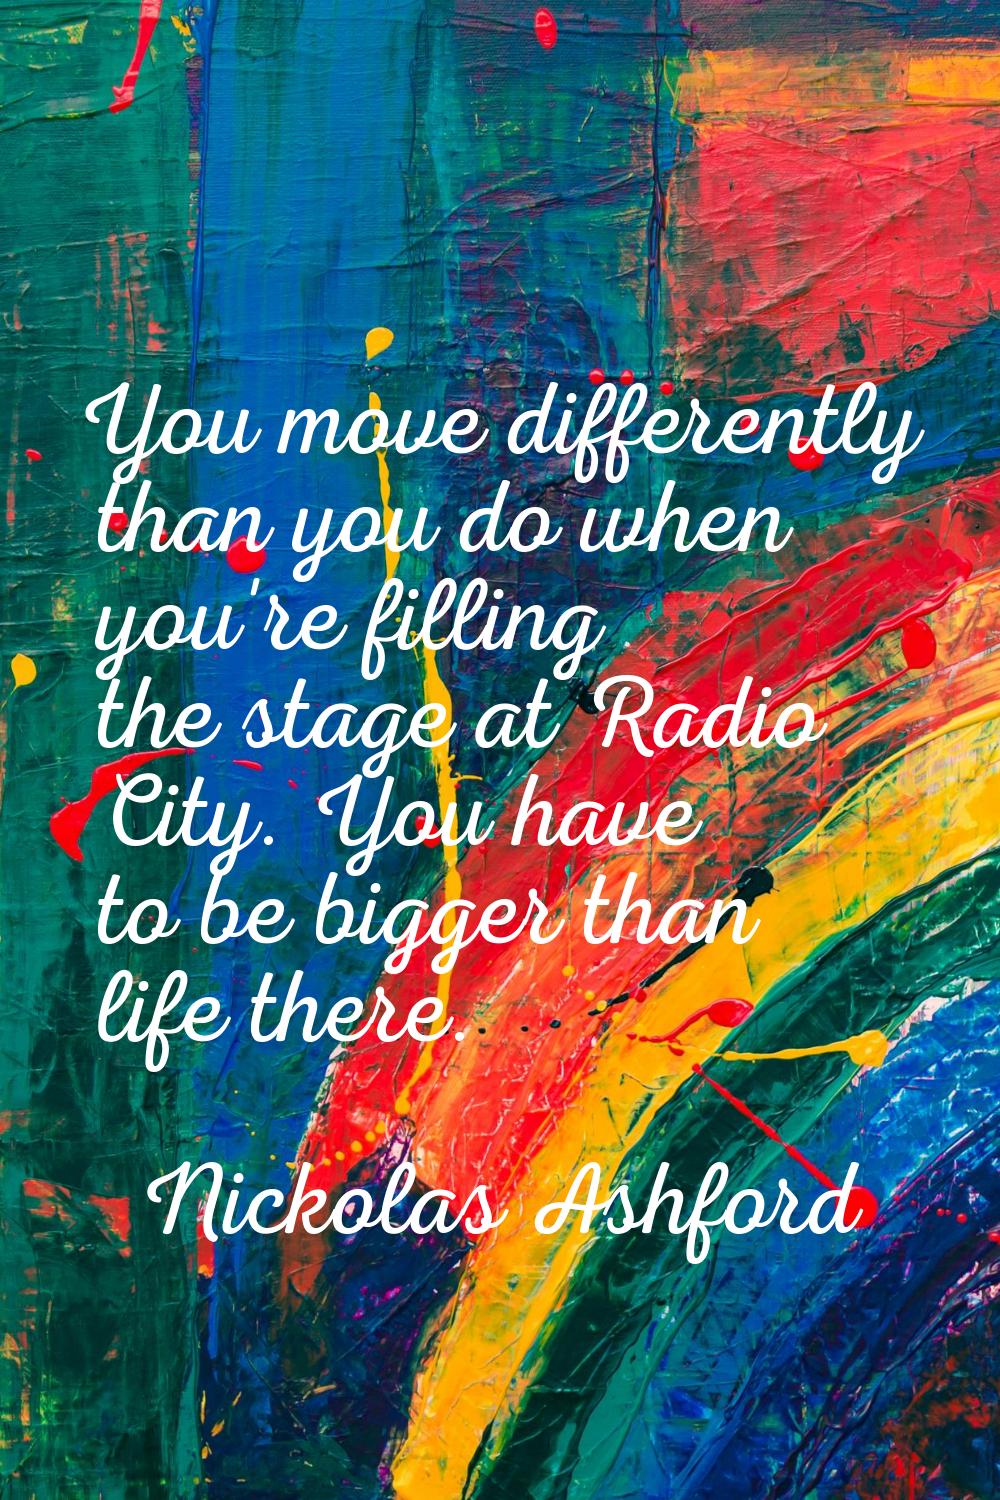 You move differently than you do when you're filling the stage at Radio City. You have to be bigger